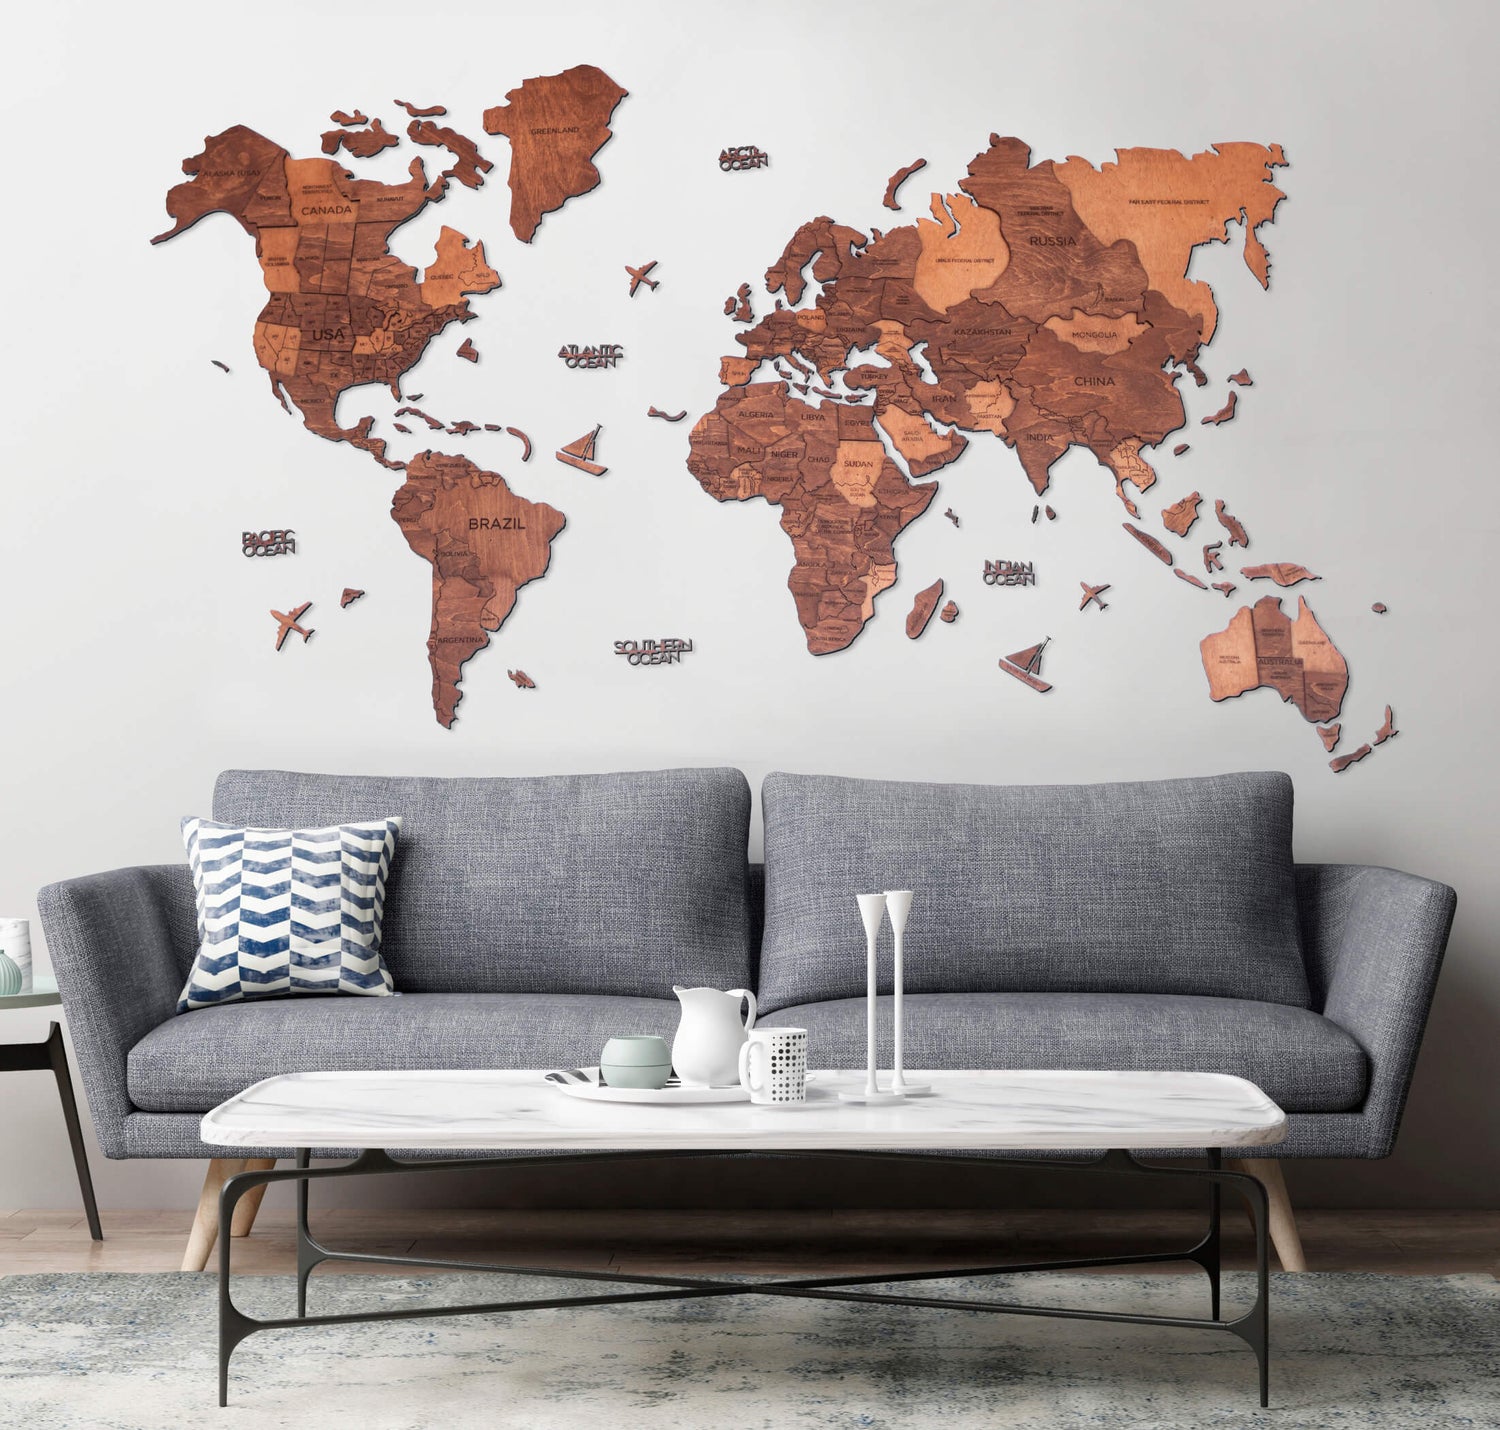  WOODEN.CITY Wooden World Map Wall Decor L - Wooden Map of The  World for Wall - Places I've Been Map of the World Wall Art - Wood World  Map Wall